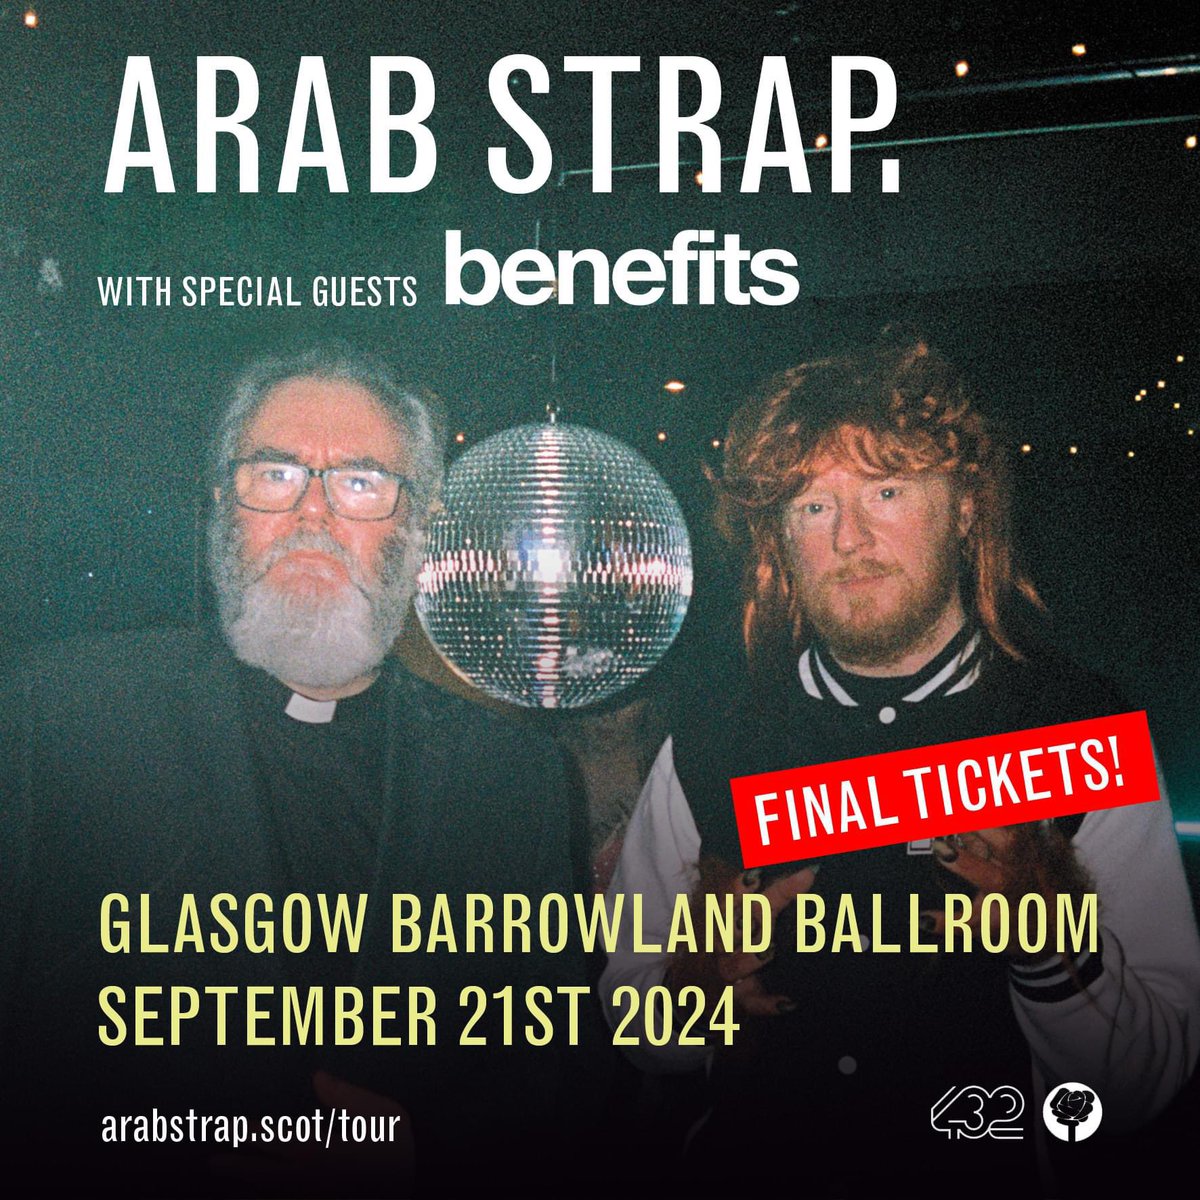 New @arabstrapband album out today!! 👍 Just a few tickets left for the band’s Barras show in Sep so get in quick! 🏃 Full Scottish dates and tickets at bit.ly/ArabStrapScot ✨